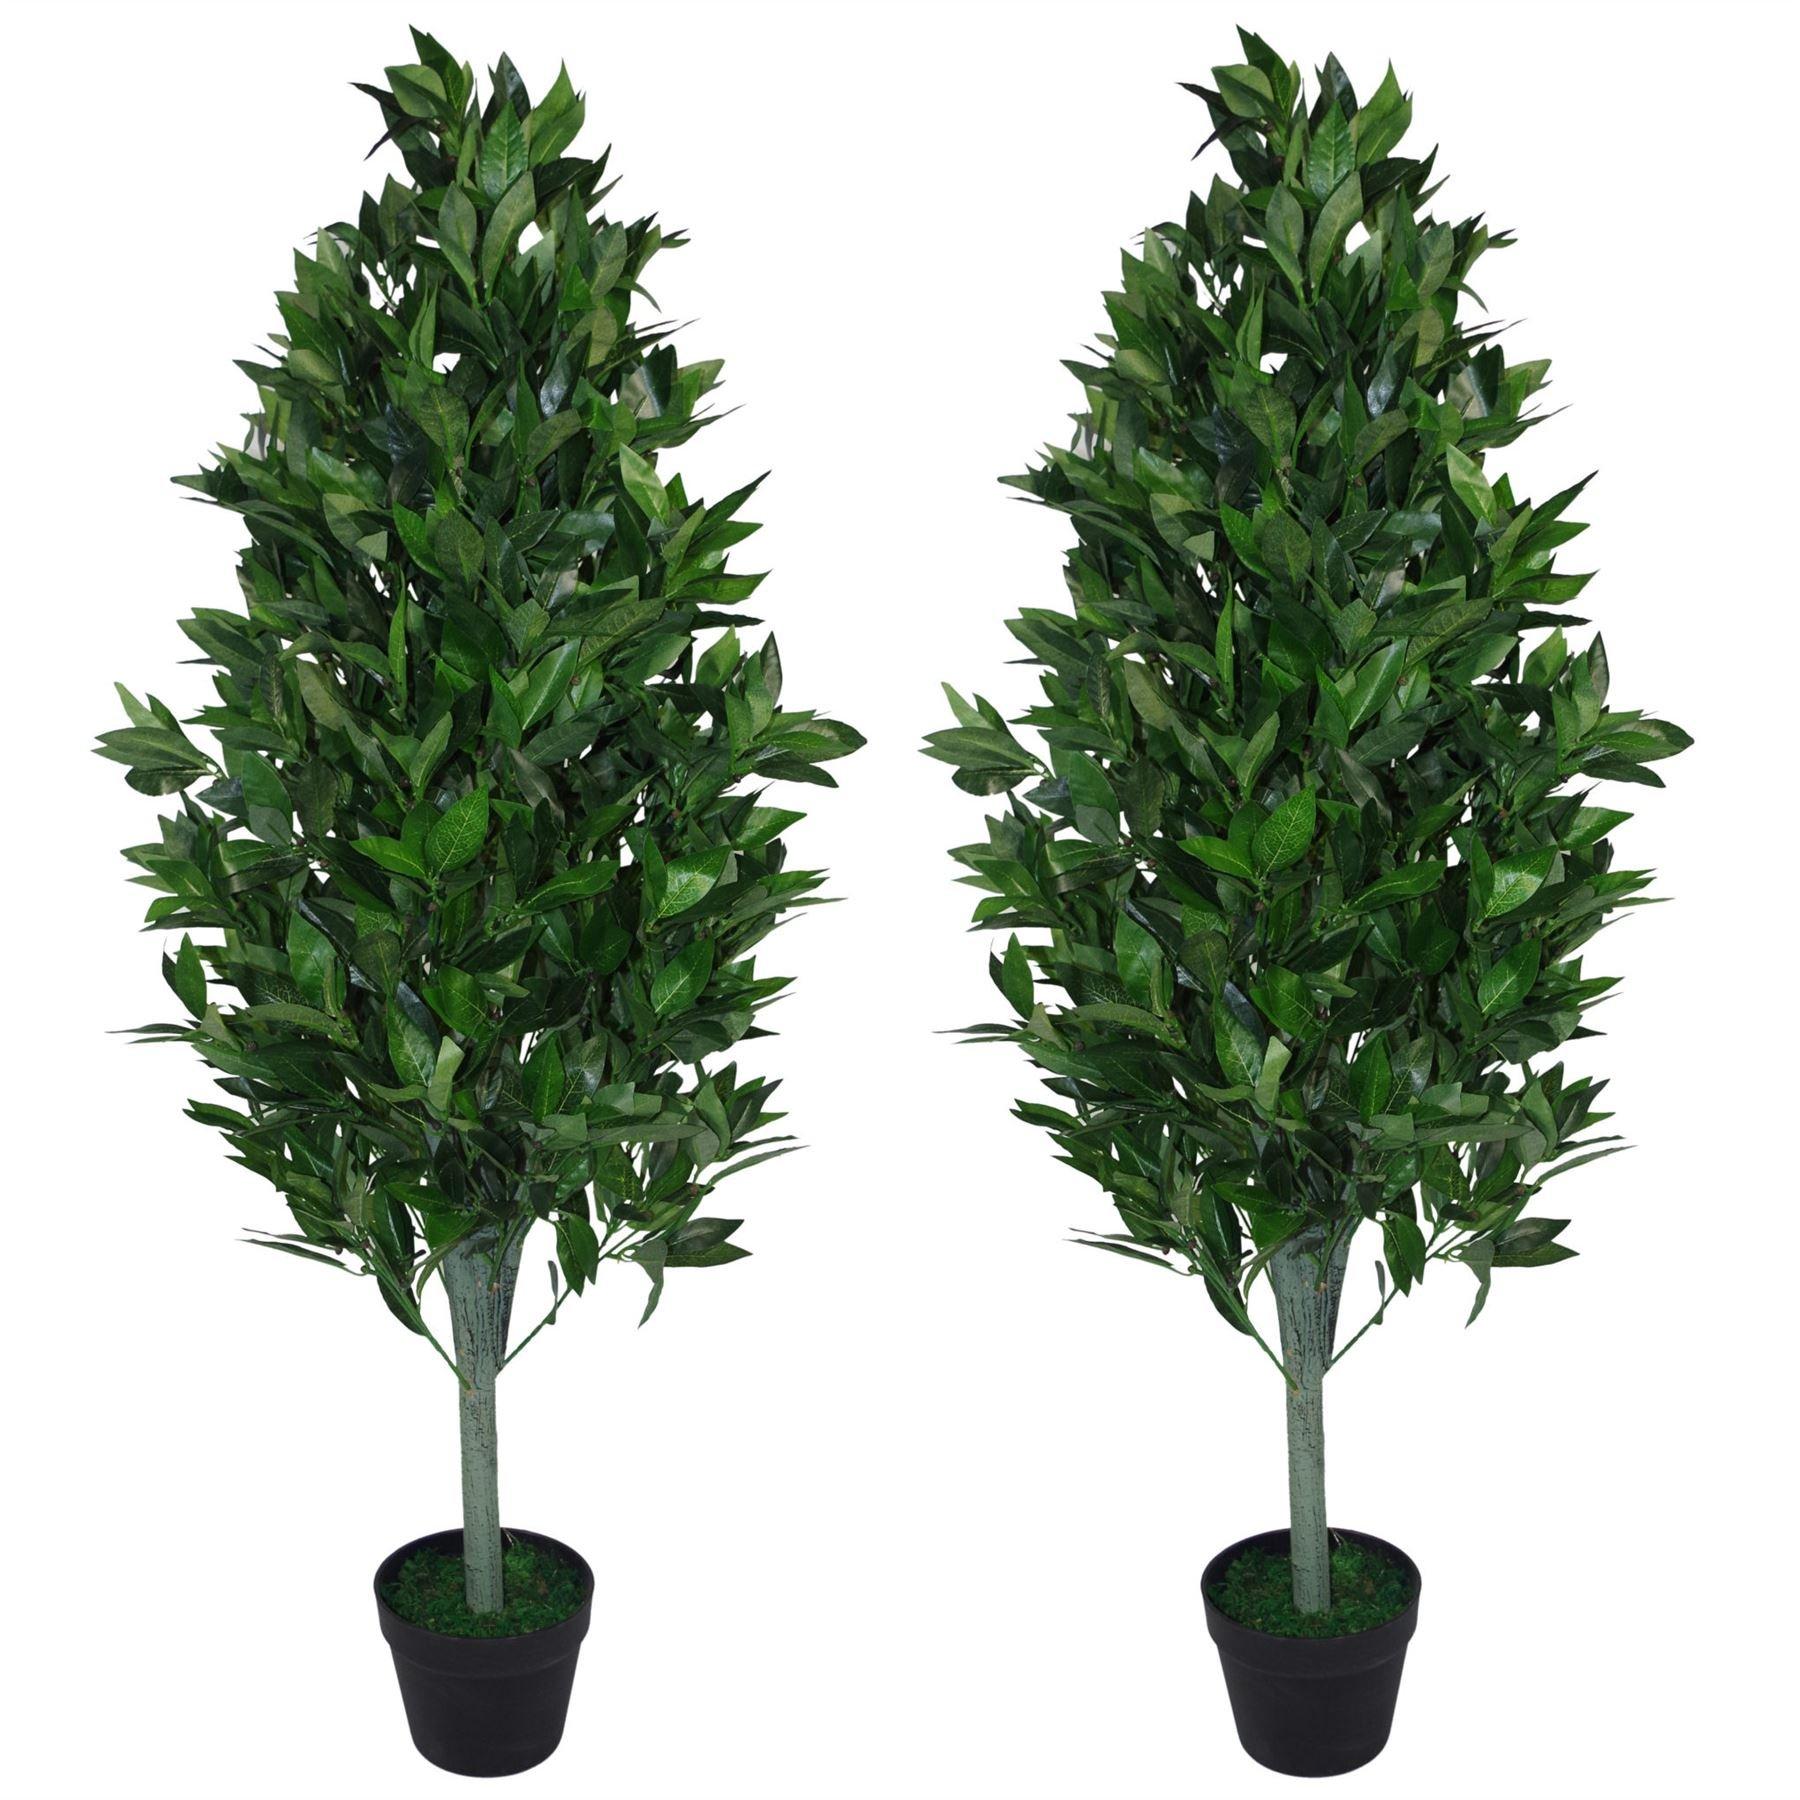 Pair of 120cm (4ft) Artificial Topiary Bay Trees Pyramid Cones - Extra Large